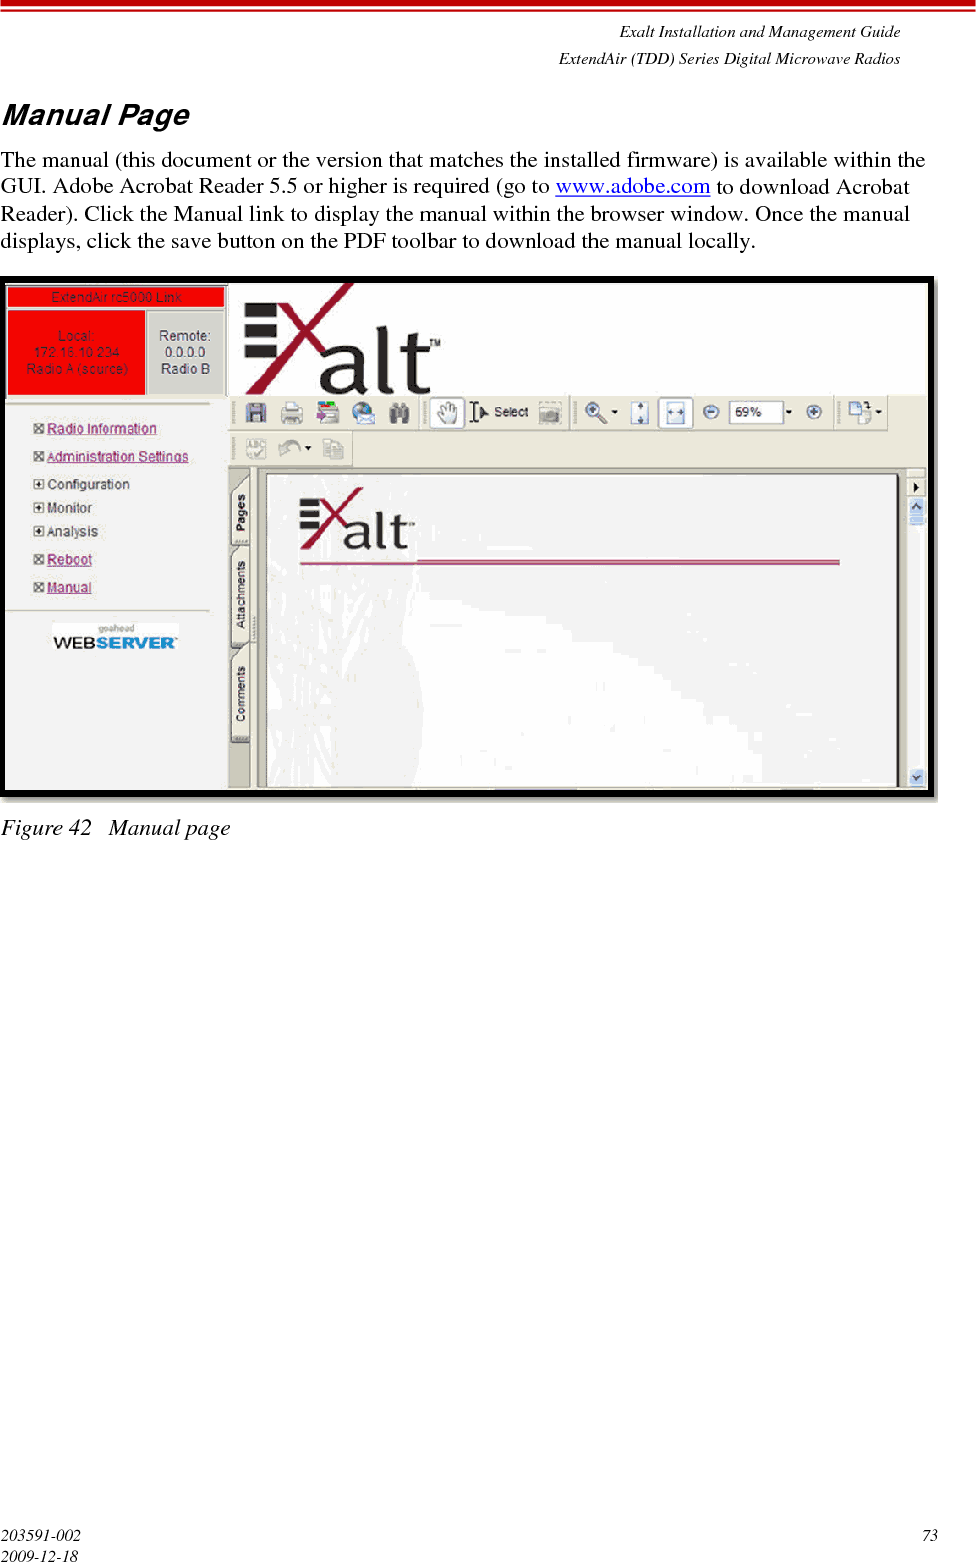 Exalt Installation and Management GuideExtendAir (TDD) Series Digital Microwave Radios203591-002 732009-12-18Manual PageThe manual (this document or the version that matches the installed firmware) is available within the GUI. Adobe Acrobat Reader 5.5 or higher is required (go to www.adobe.com to download Acrobat Reader). Click the Manual link to display the manual within the browser window. Once the manual displays, click the save button on the PDF toolbar to download the manual locally.Figure 42   Manual page